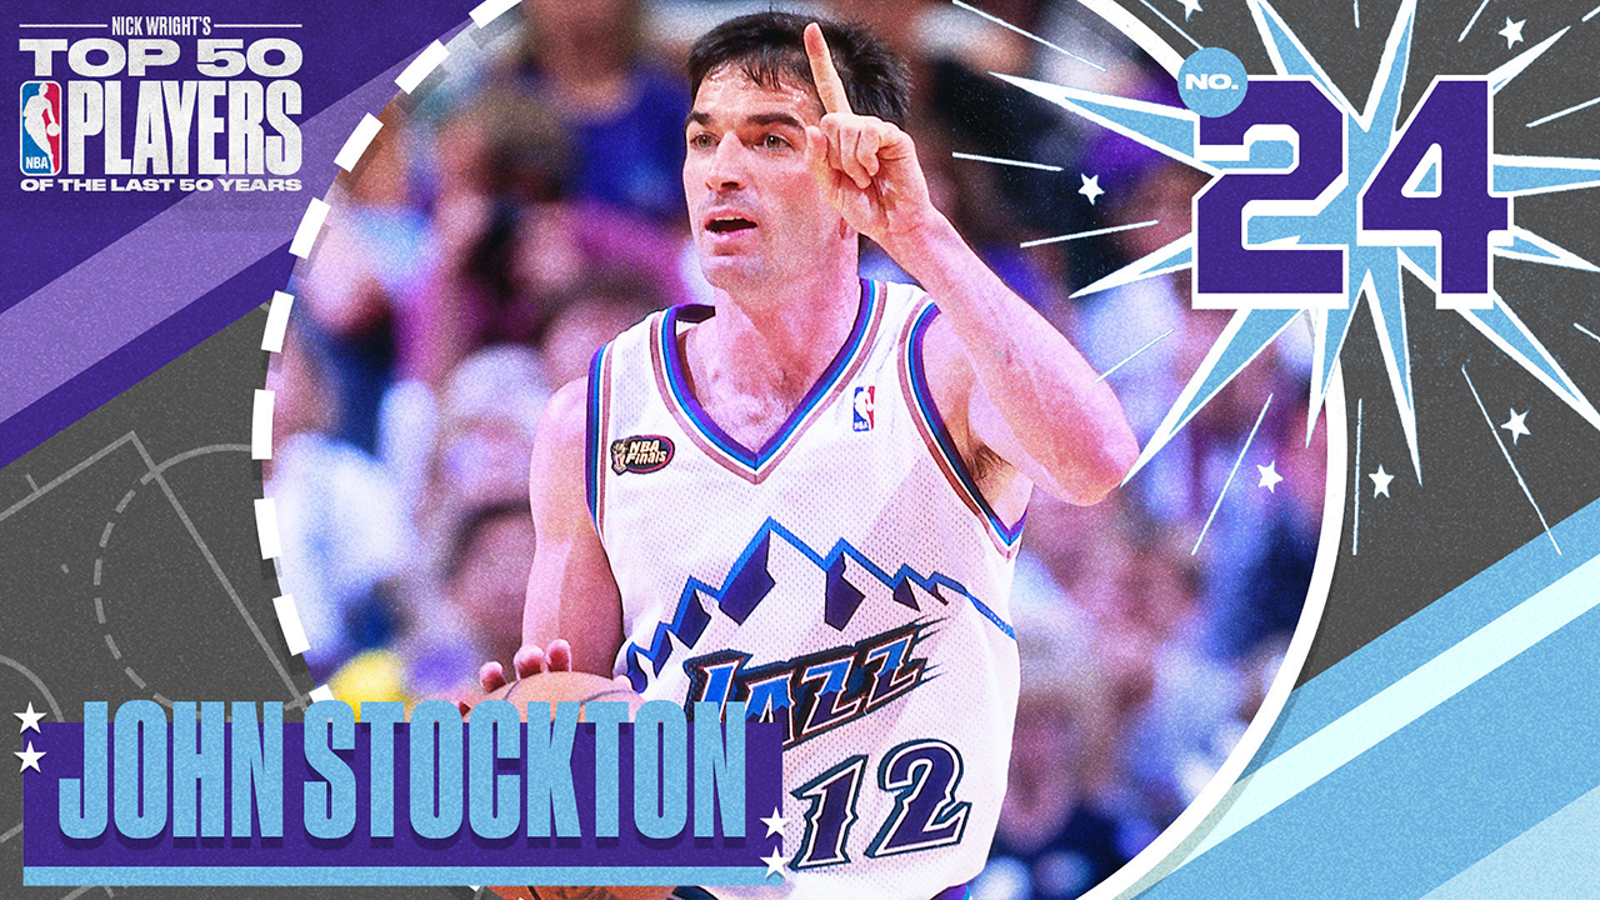 John Stockton is No. 24 on Nick Wright's Top 50 NBA Players of the Last 50 Years